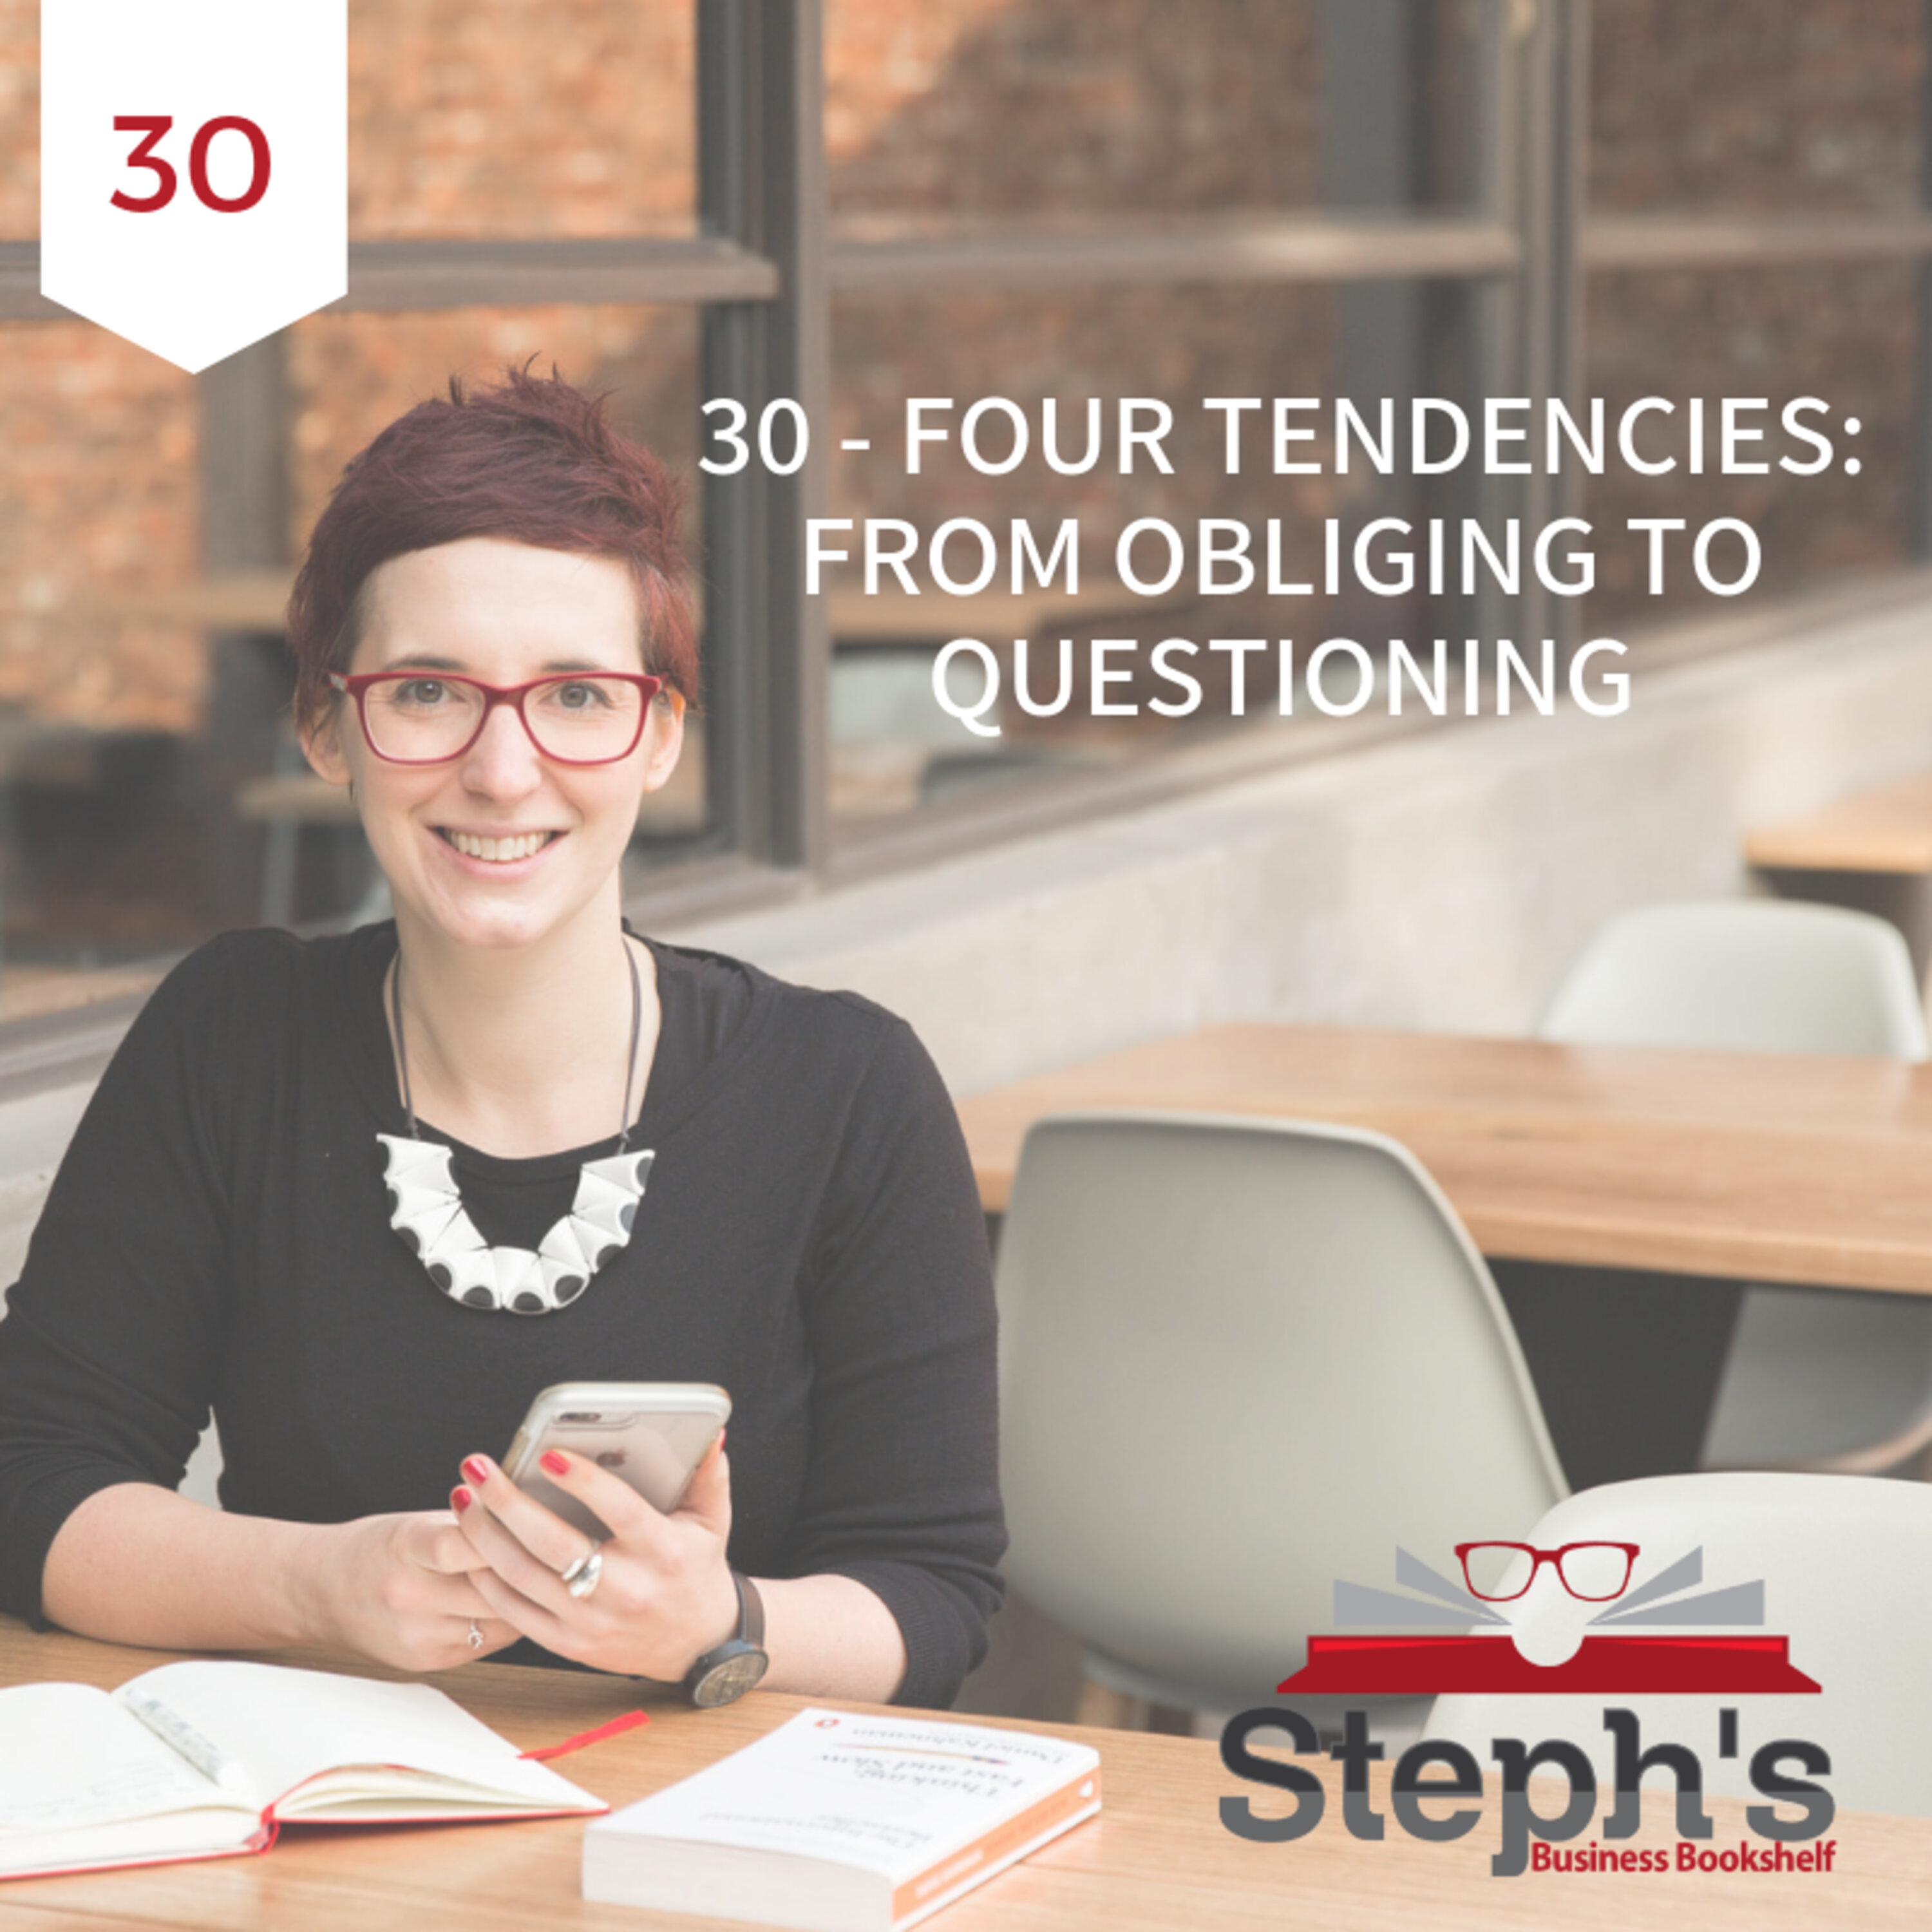 Four Tendencies by Gretchen Rubin: From Obliging to Questioning